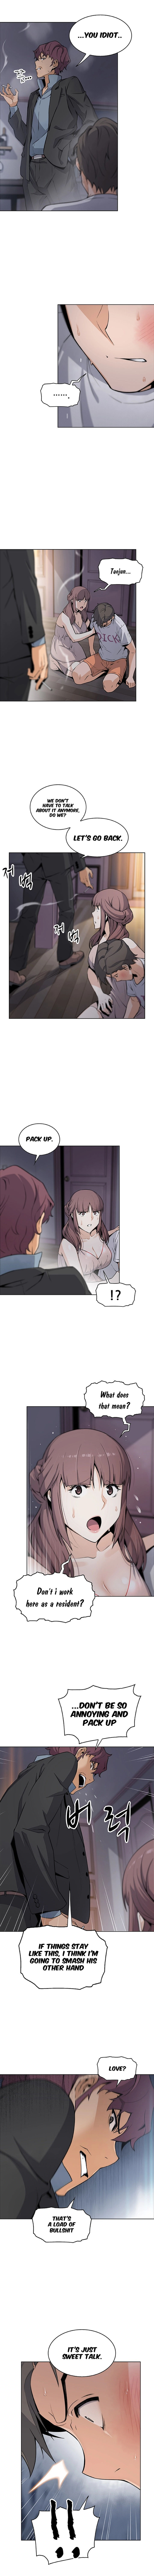 Housekeeper Manhwa - Chapter 38 Page 4